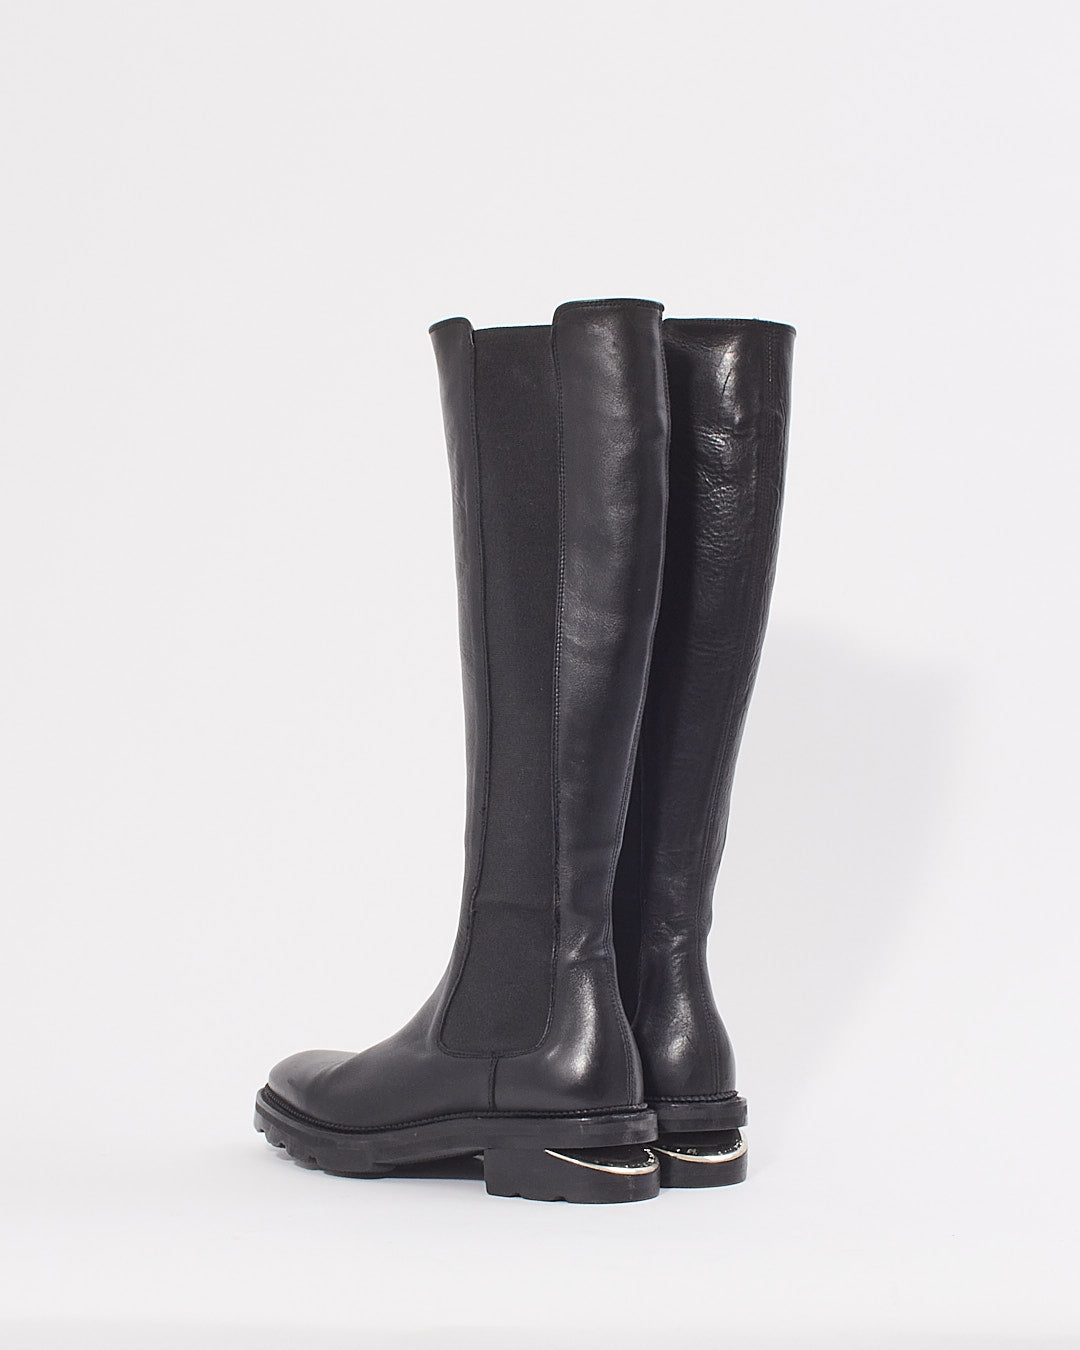 Alexander Wang Black Leather Boots - 38.5